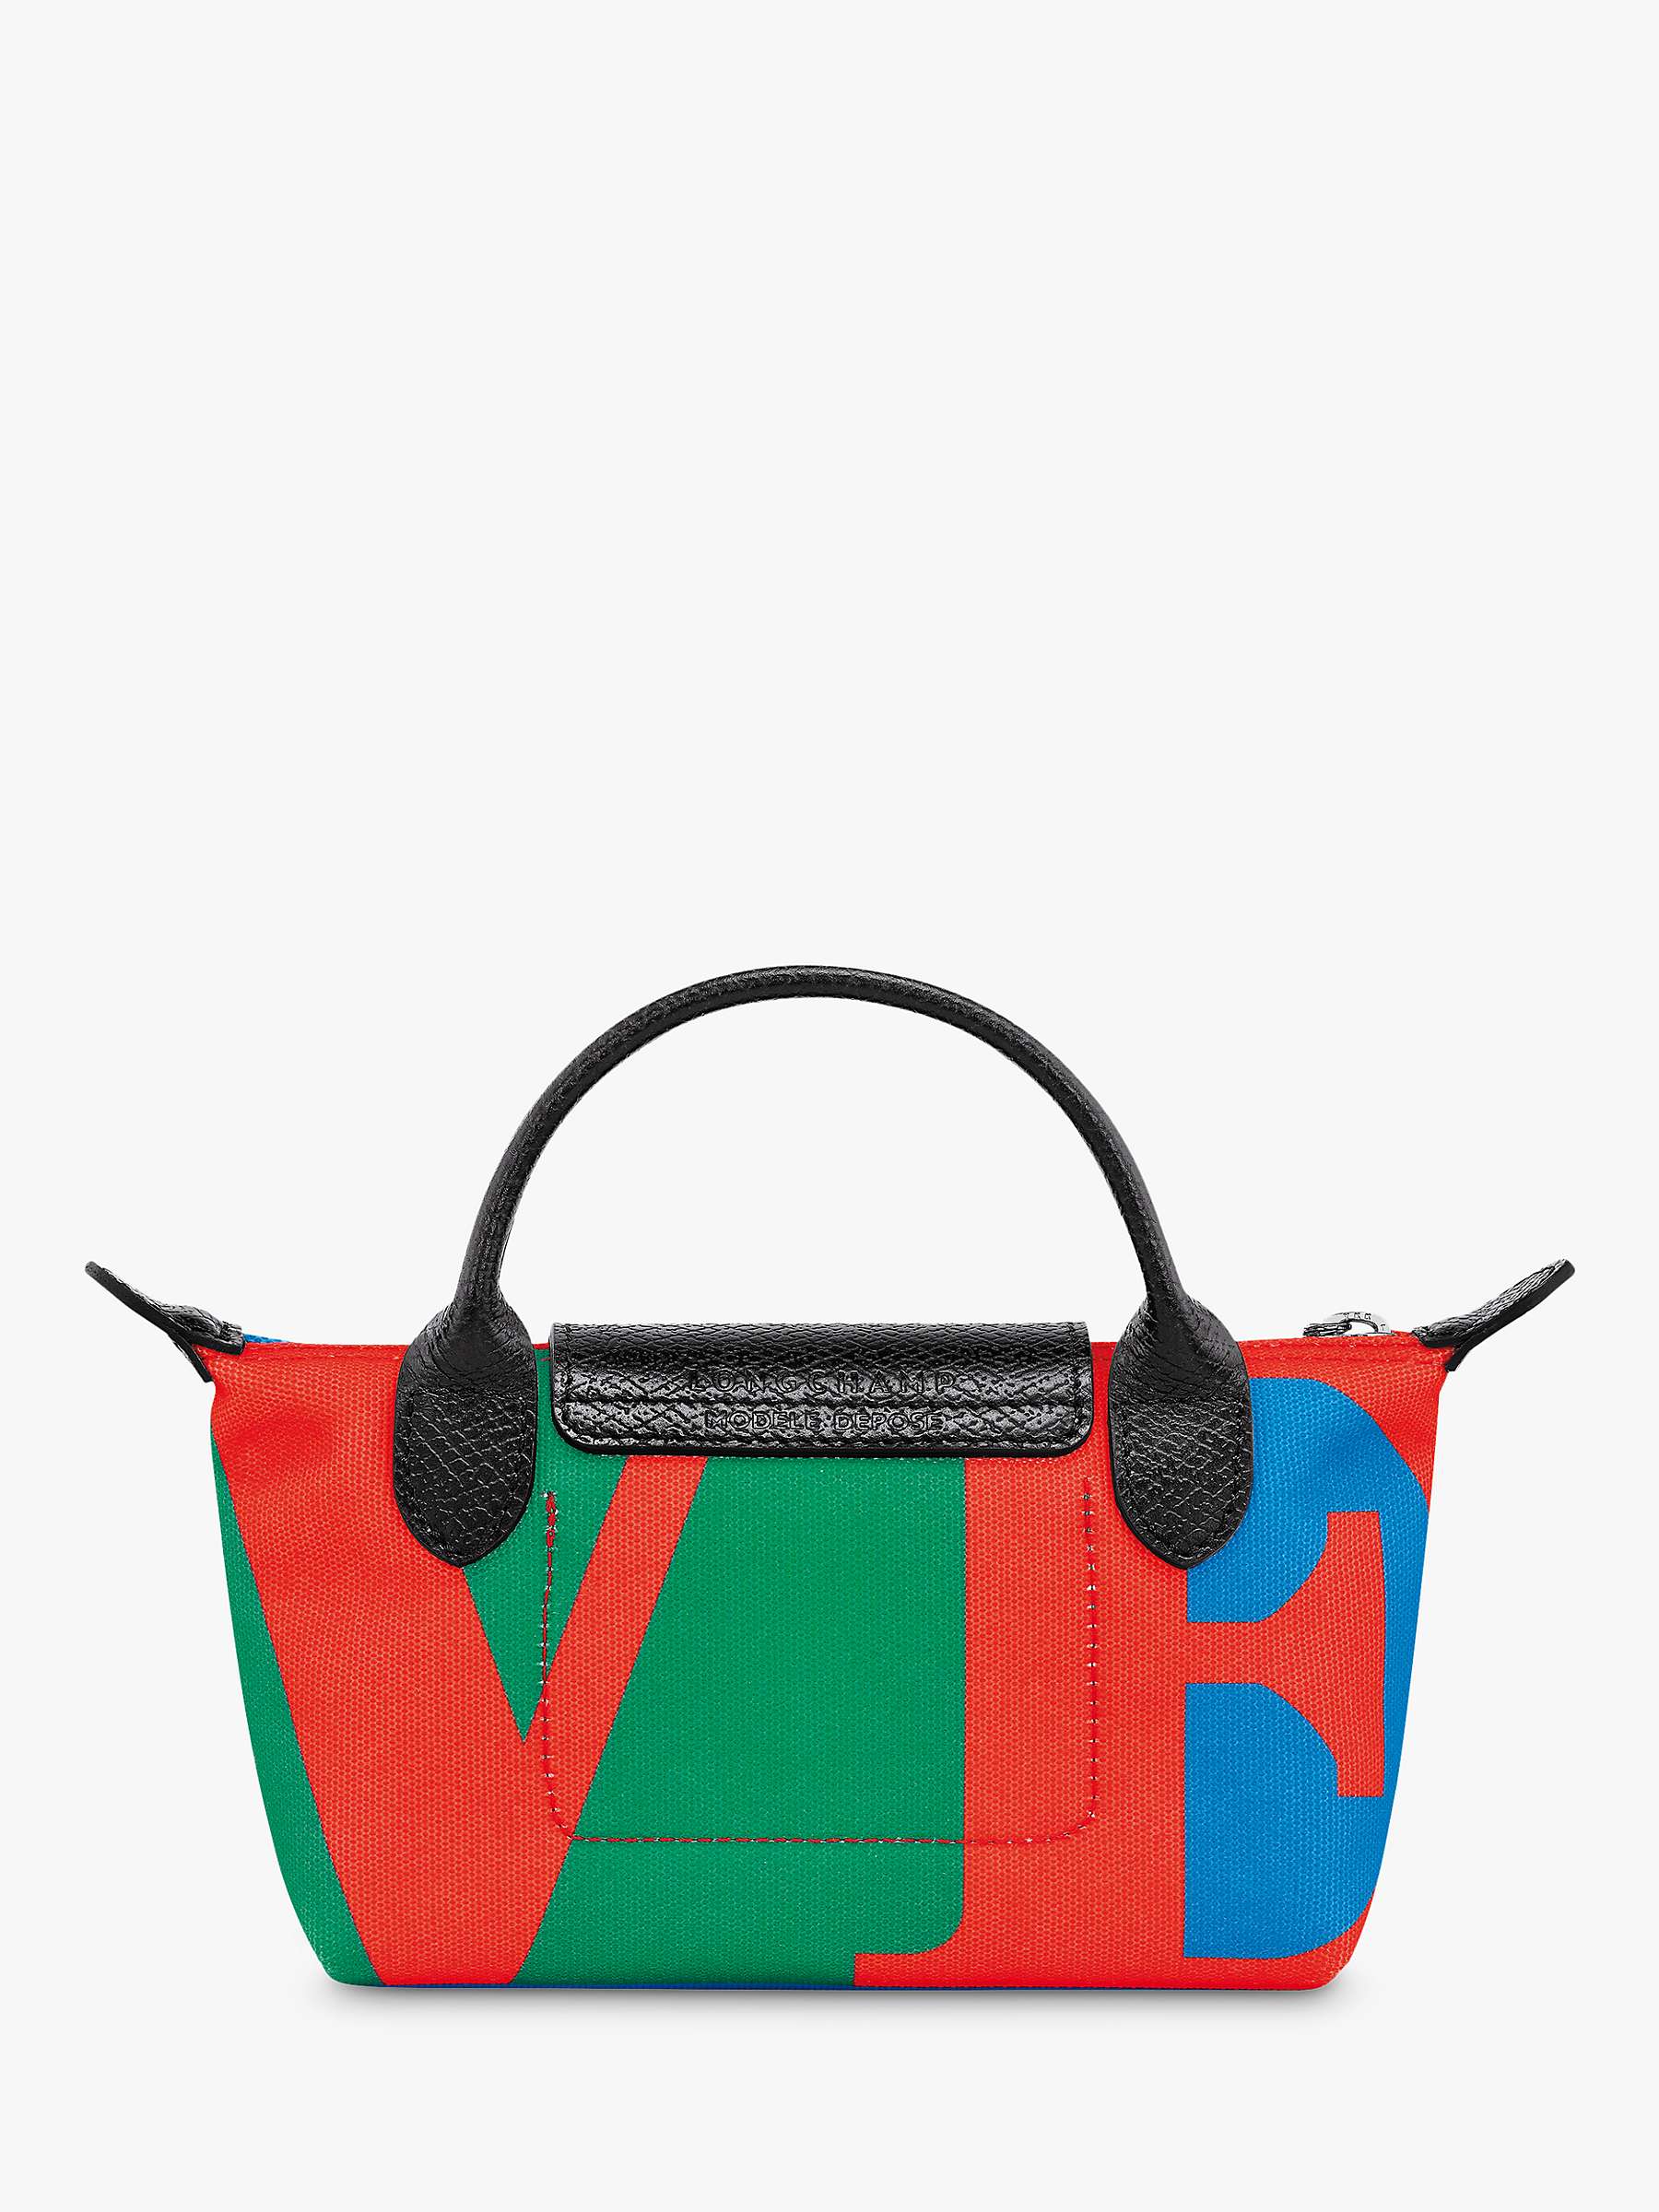 Buy Longchamp Robert Indiana Pouch, Red Online at johnlewis.com